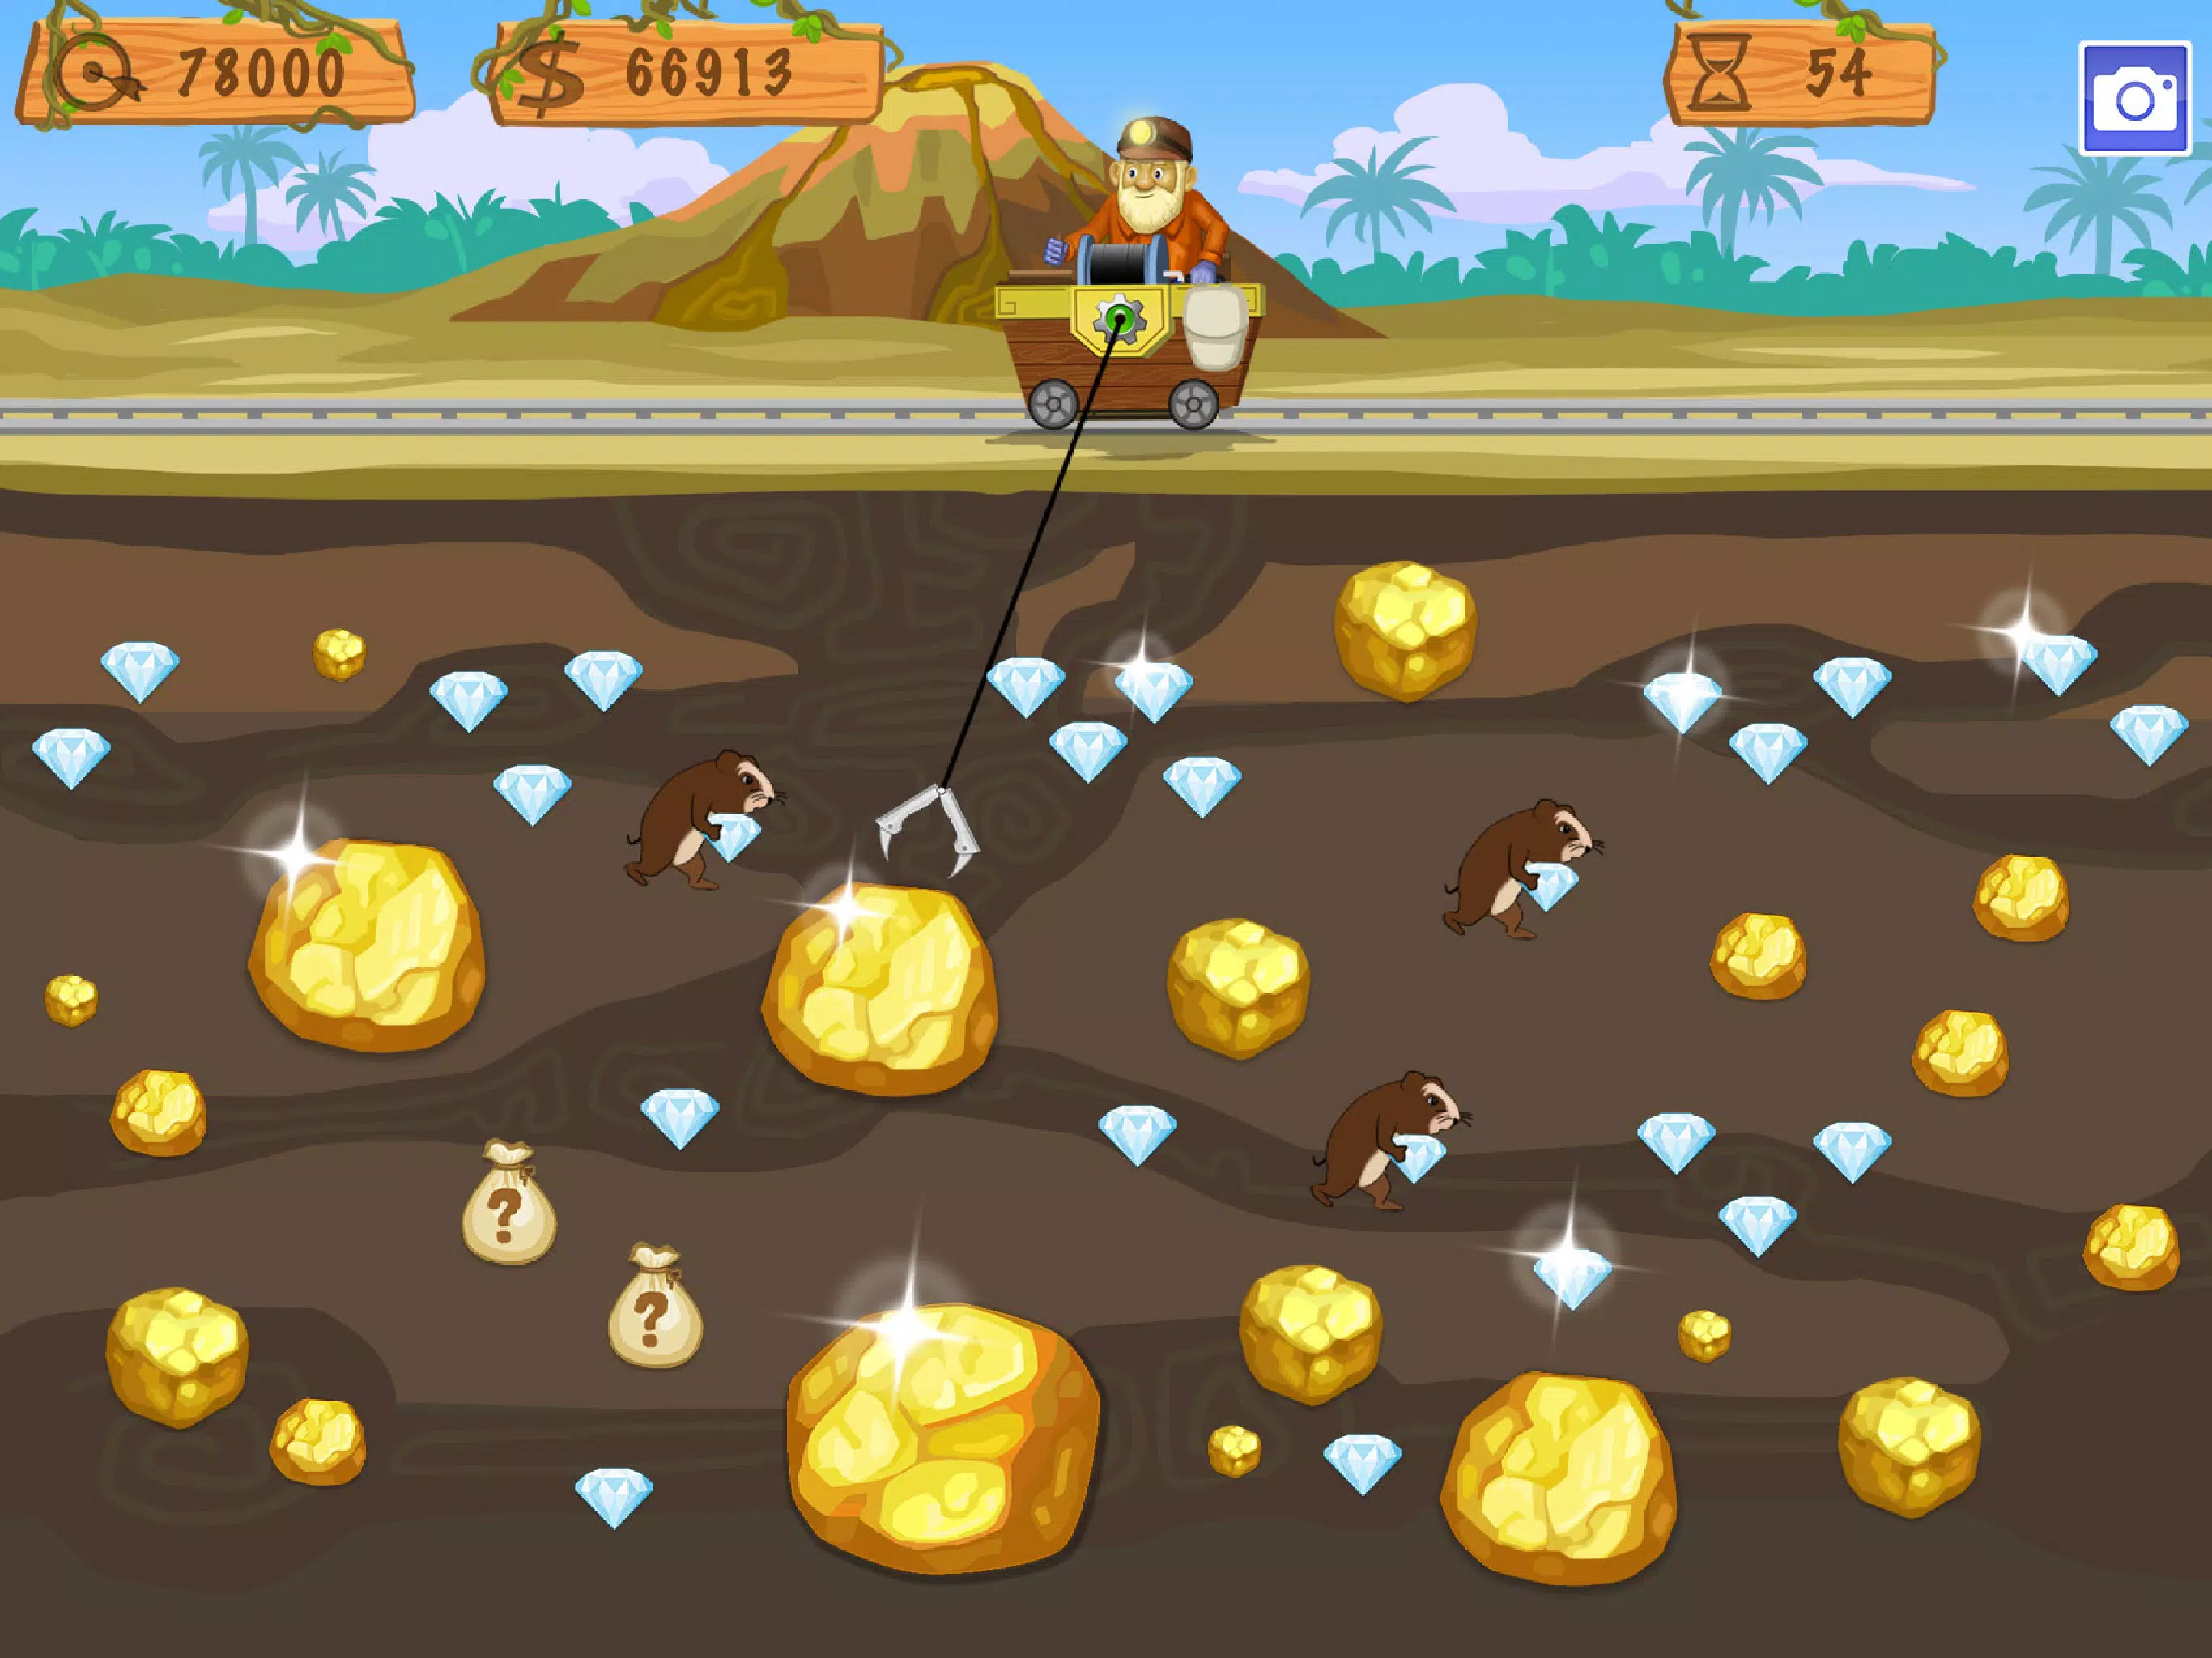 Century Gold Miner - Classic Gold Digger Games Free::Appstore for  Android